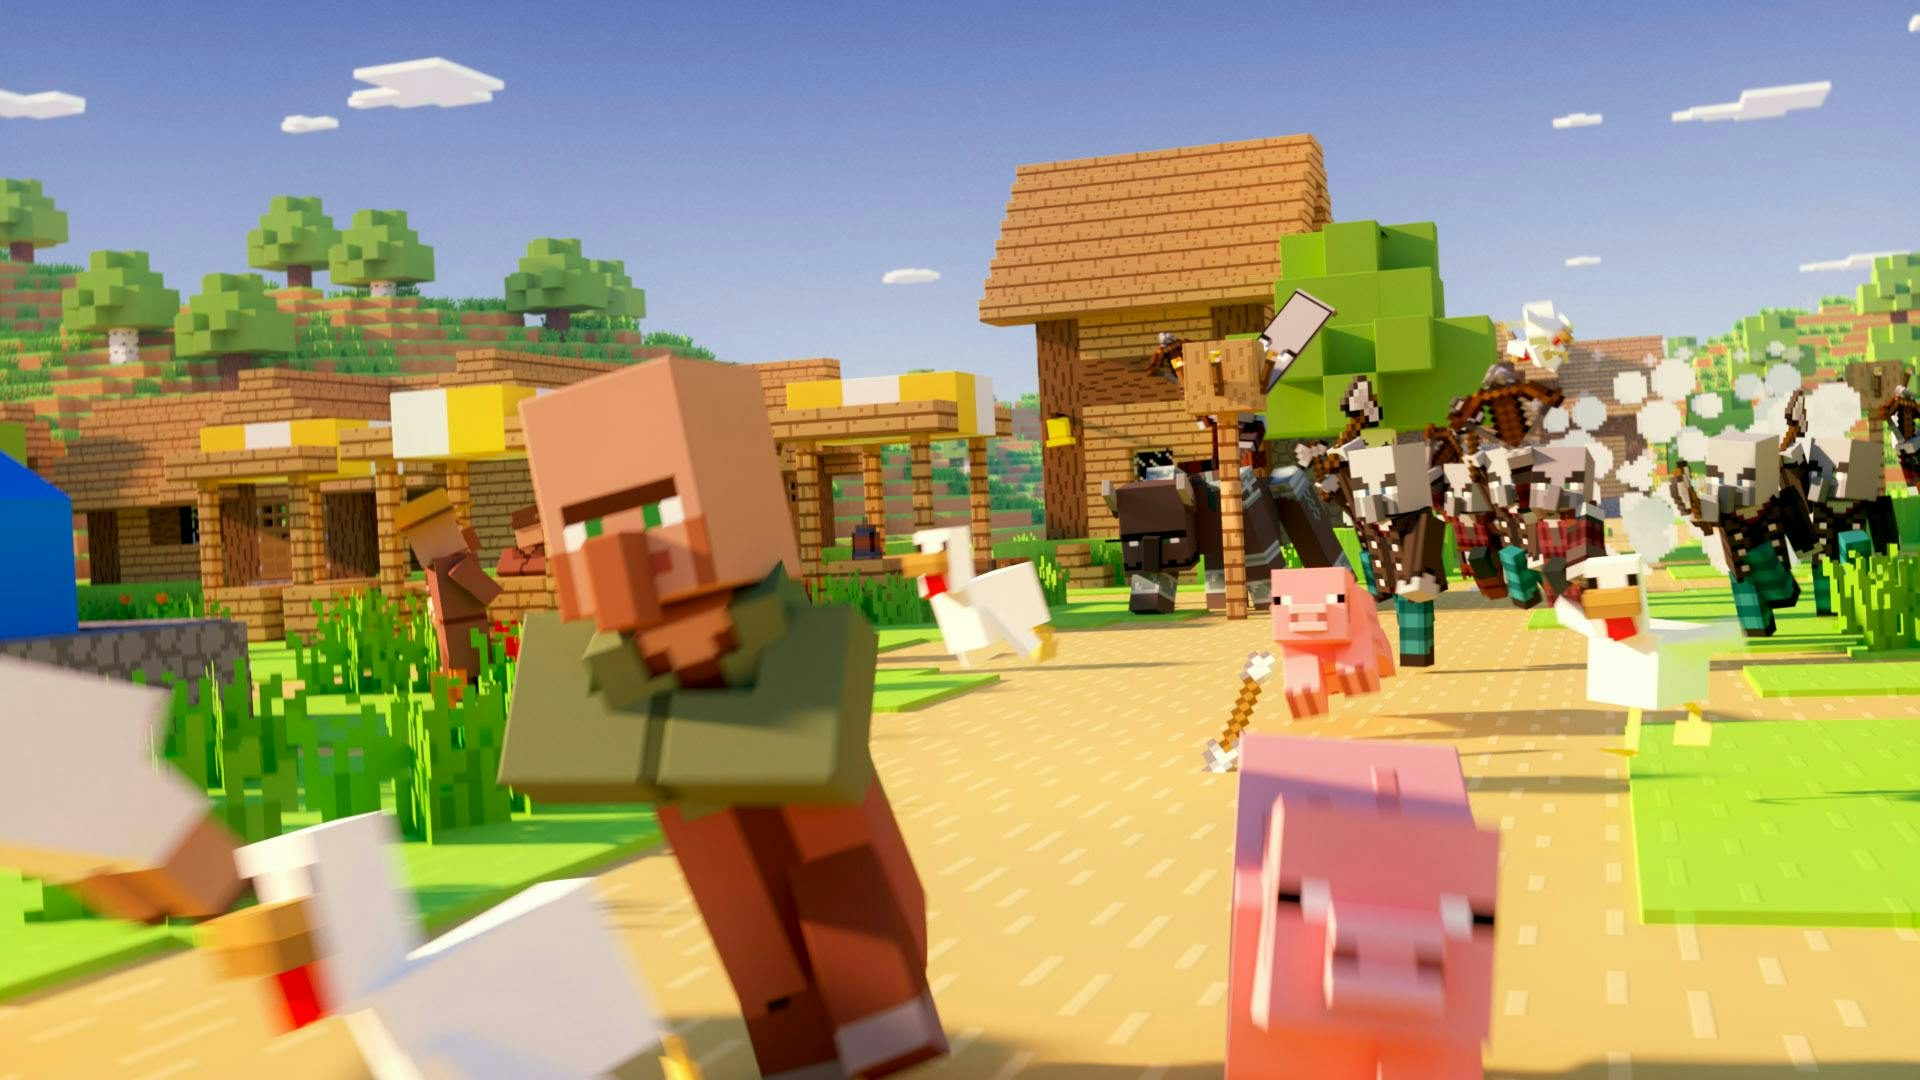 The town square being attacked by pillagers with axes. Villagers, pigs and chickens fleeing towards the camera.